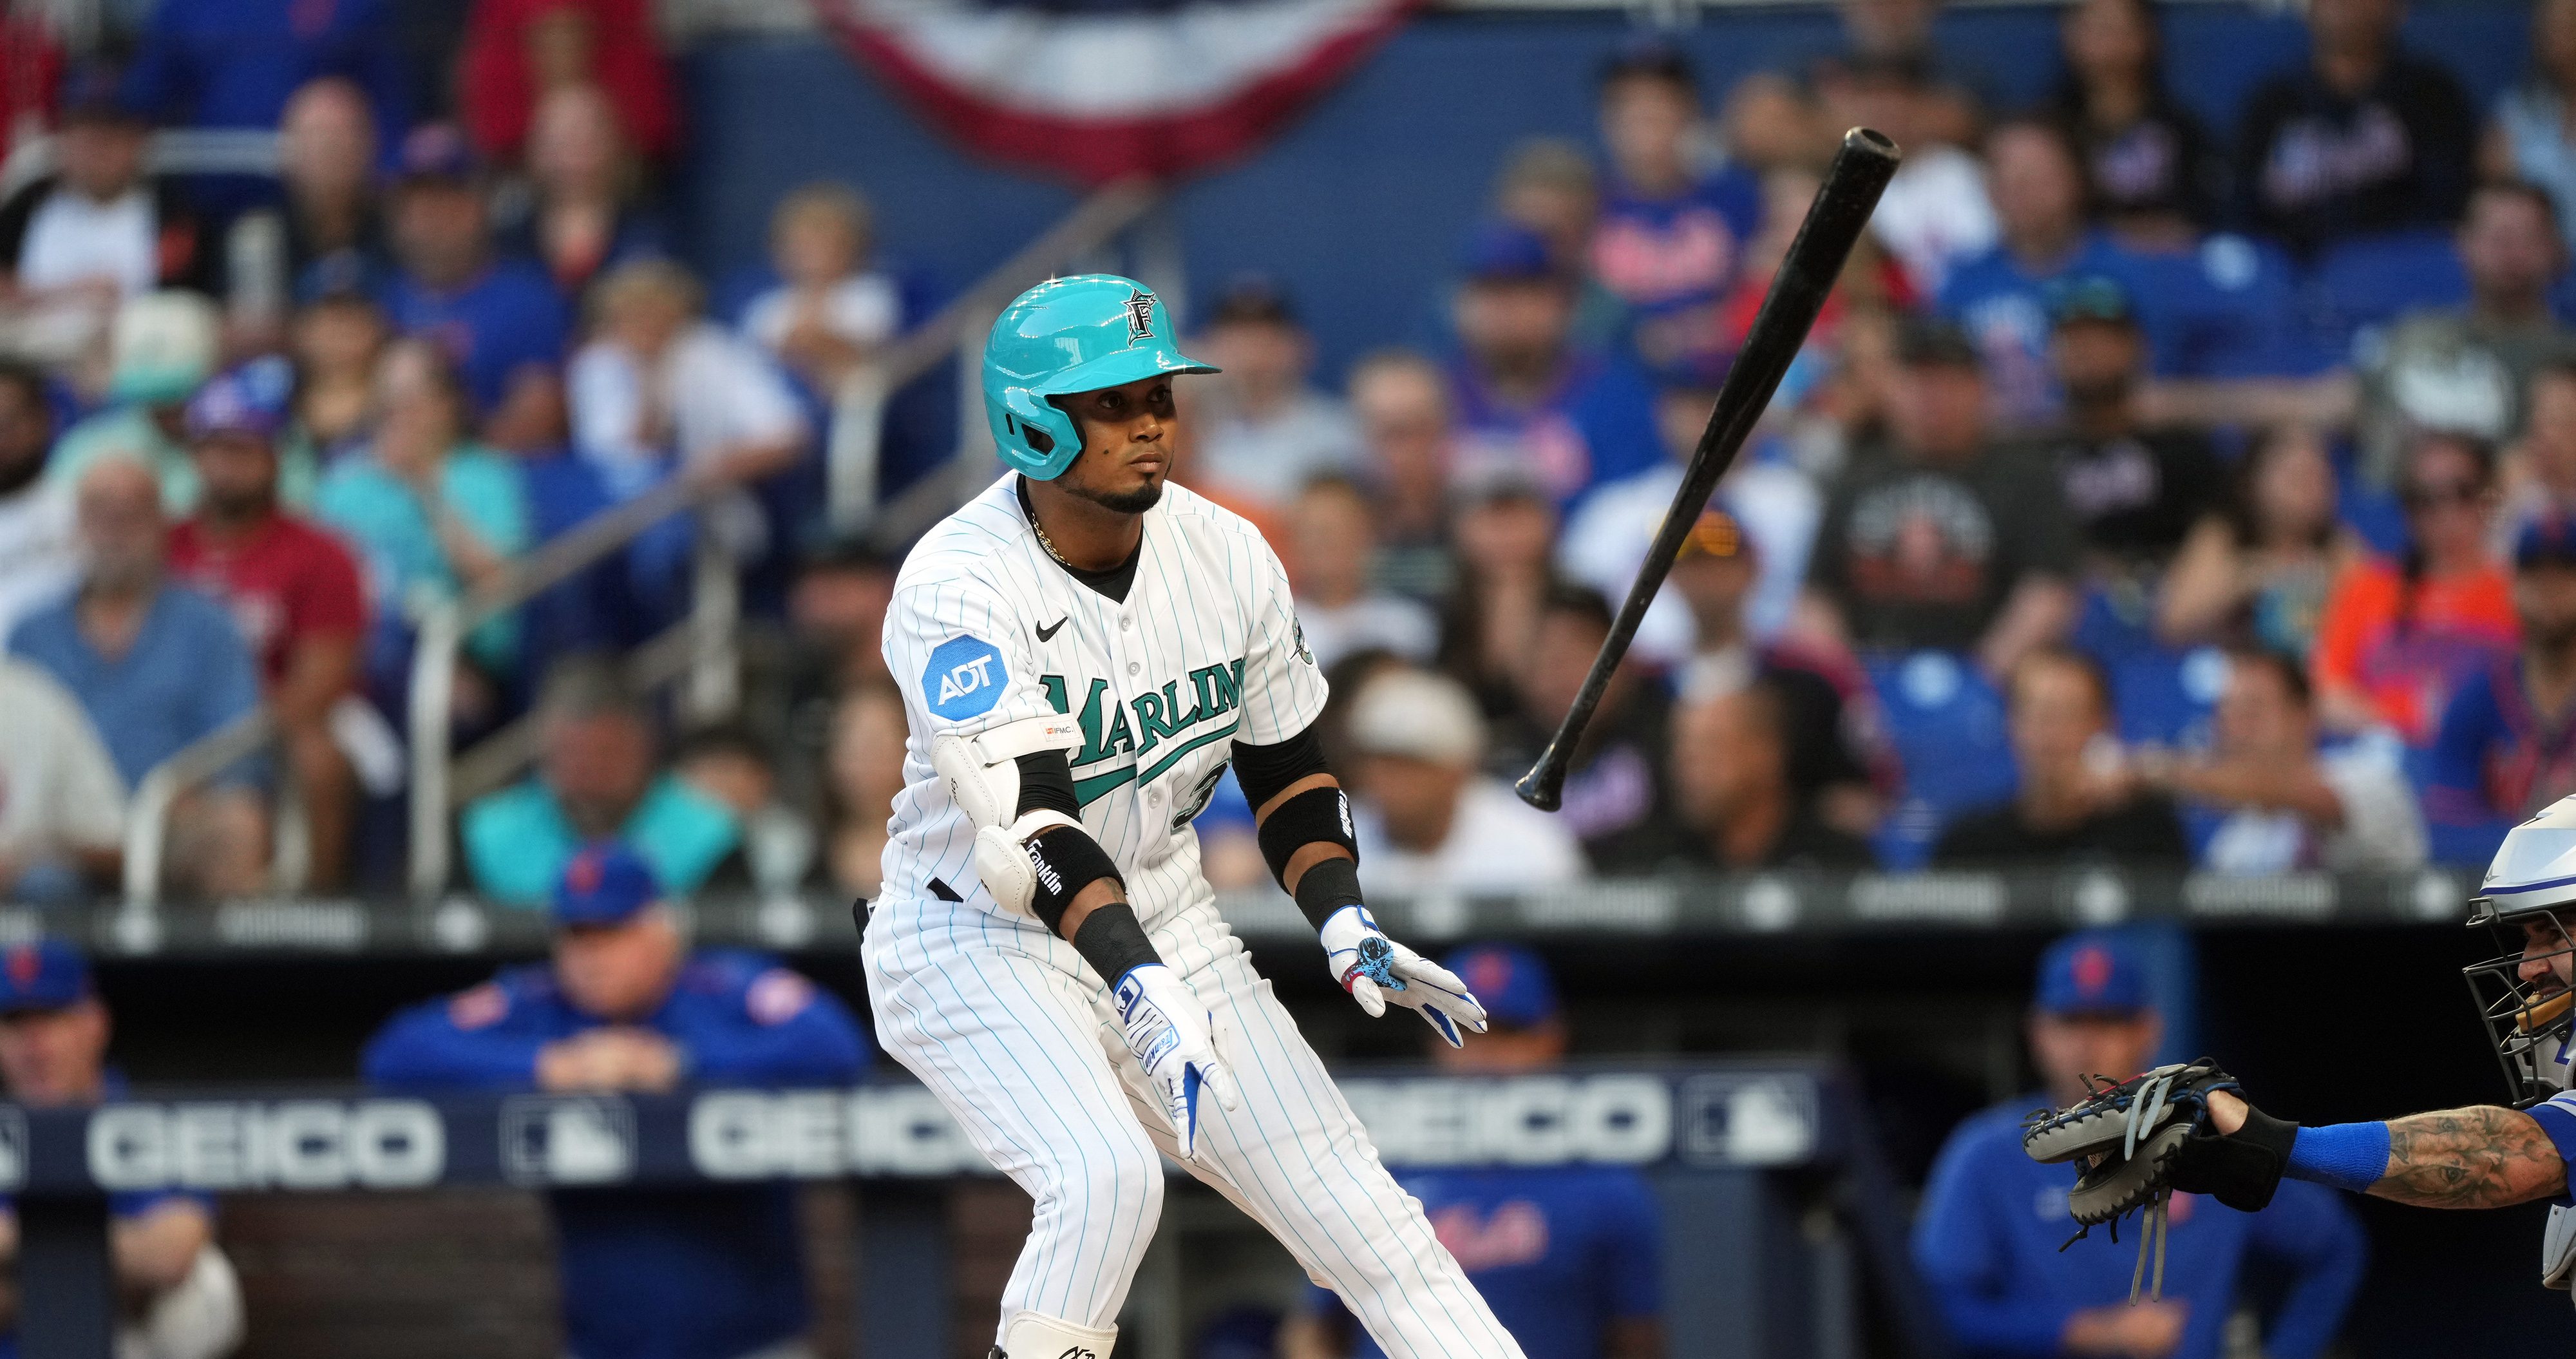 The Marlins' brand-new uniforms look like Miami at night